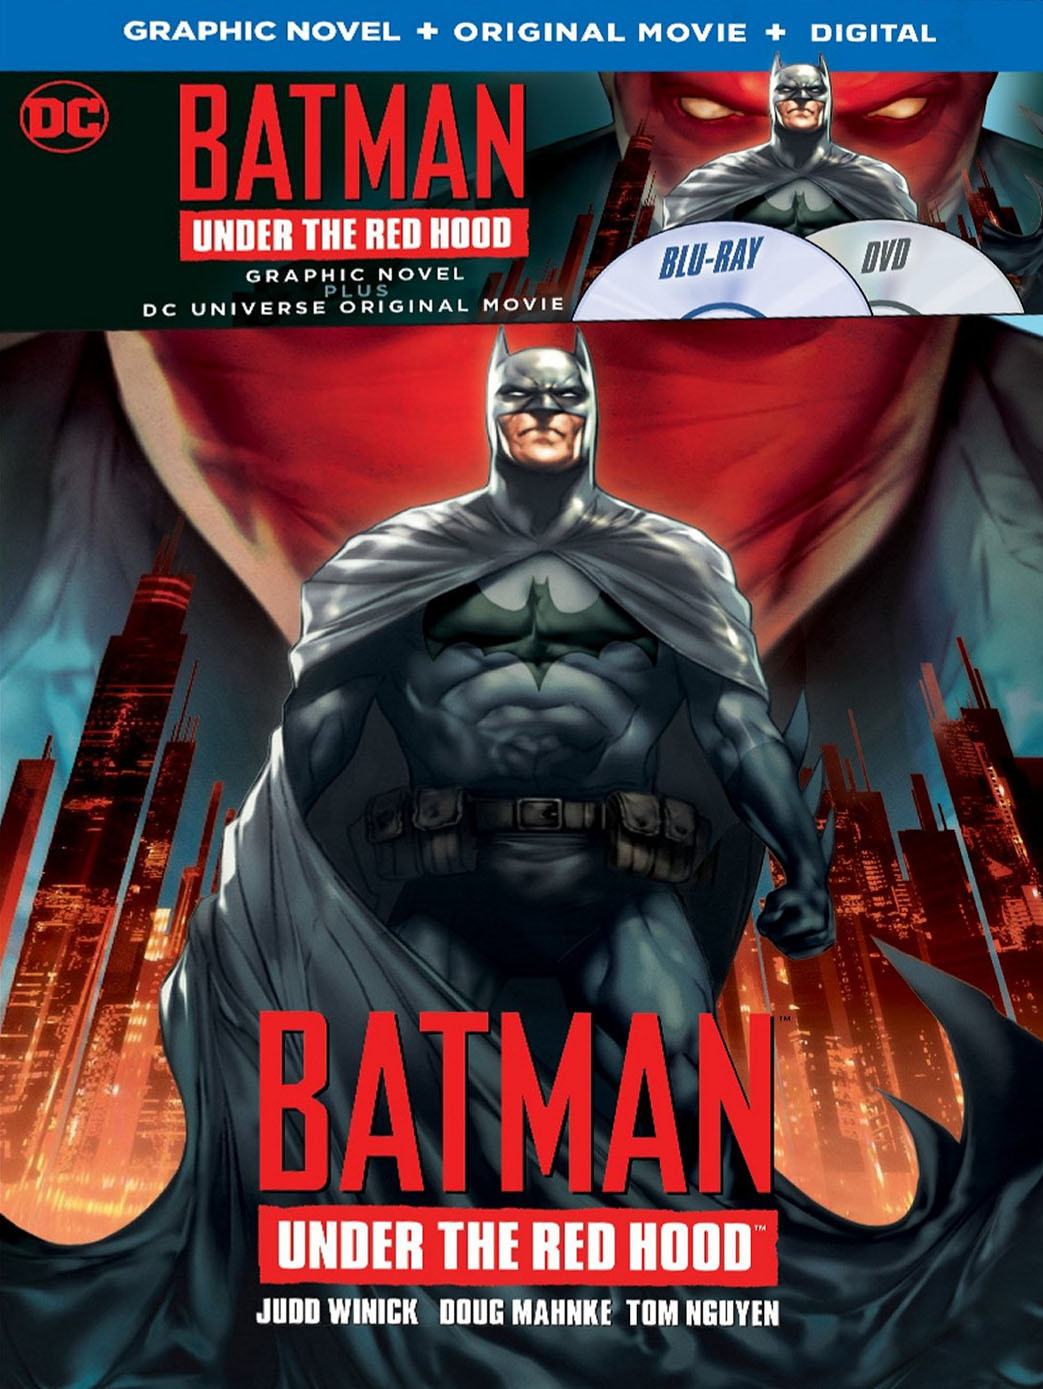 Batman: Under the Red [Includes Graphic Novel] [Blu-ray] [2010] - Best Buy